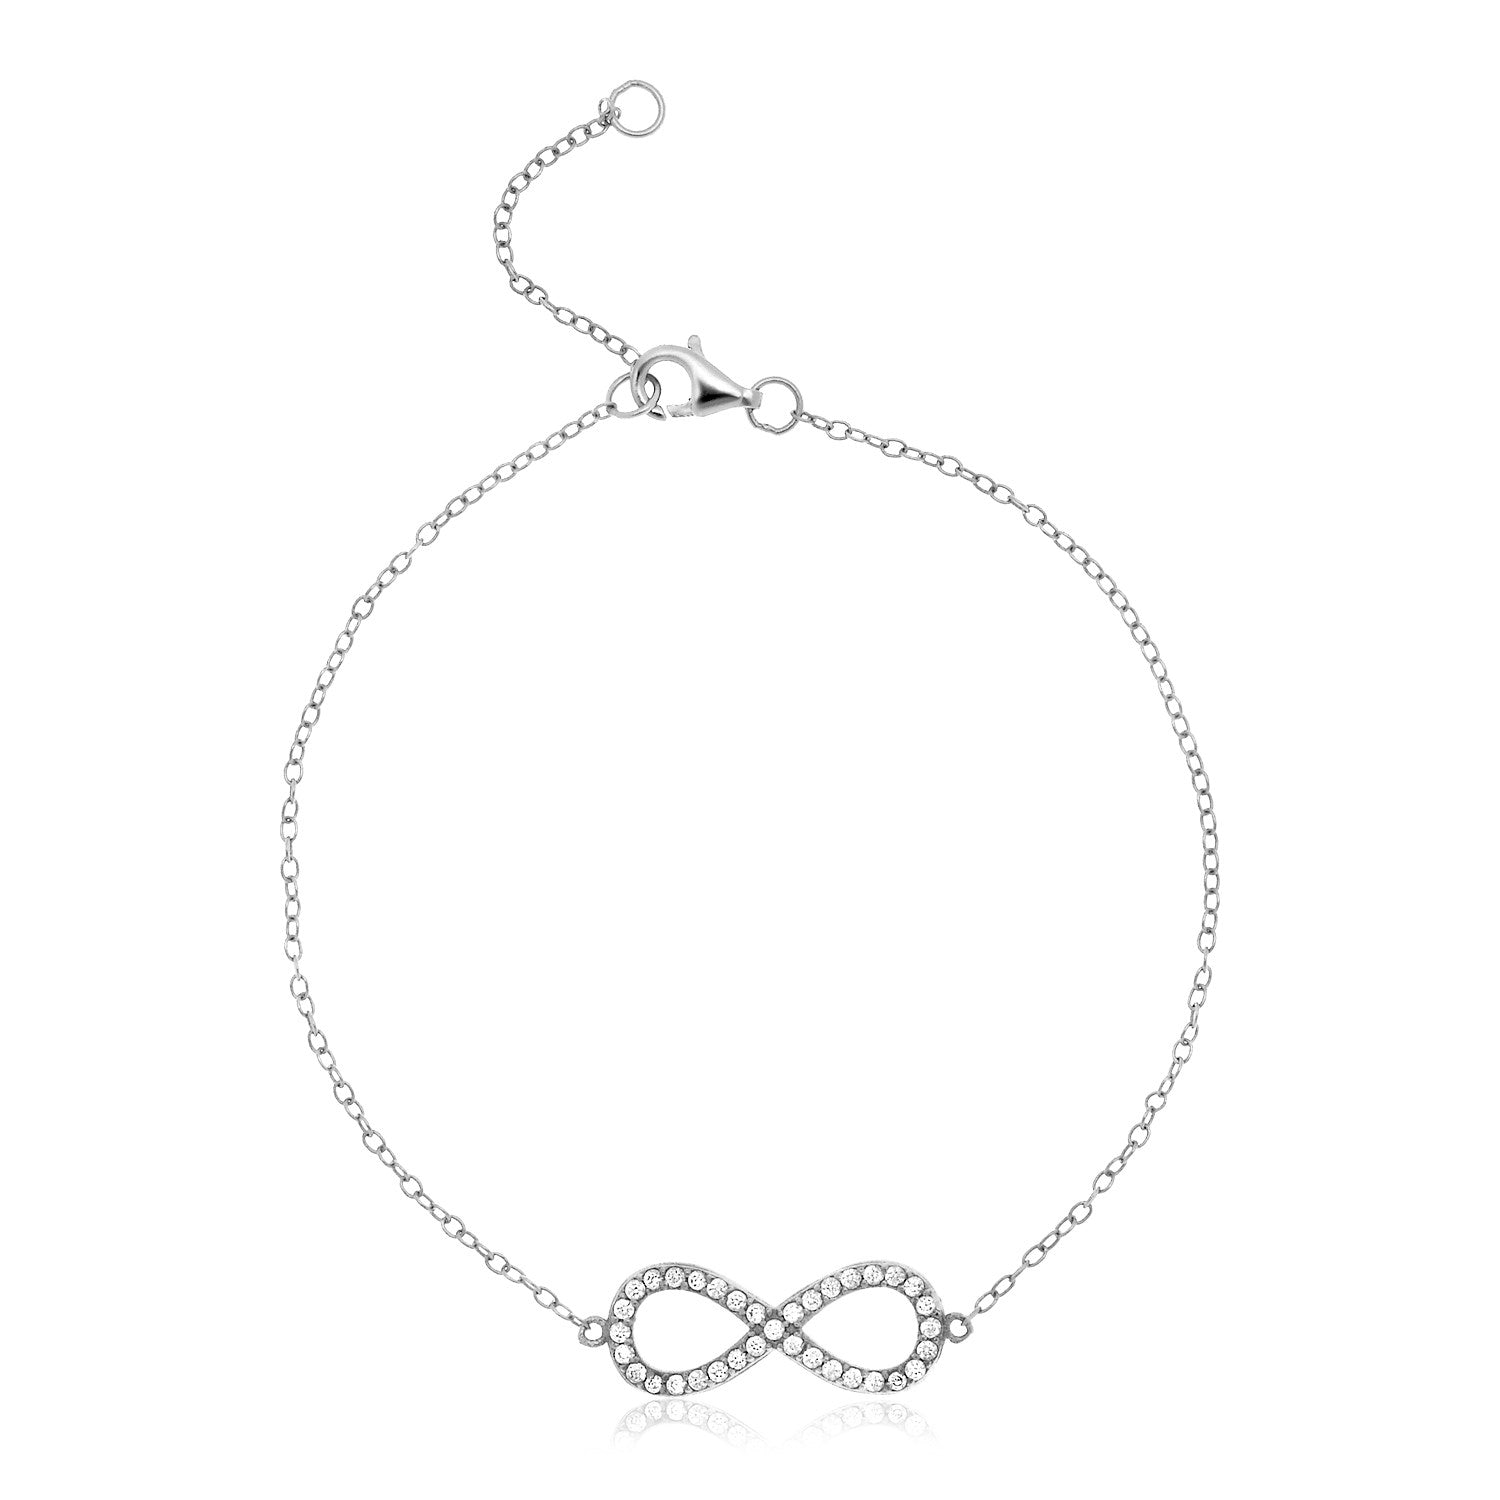 Sterling Silver Infinity Symbol Bracelet with Cubic Zirconias